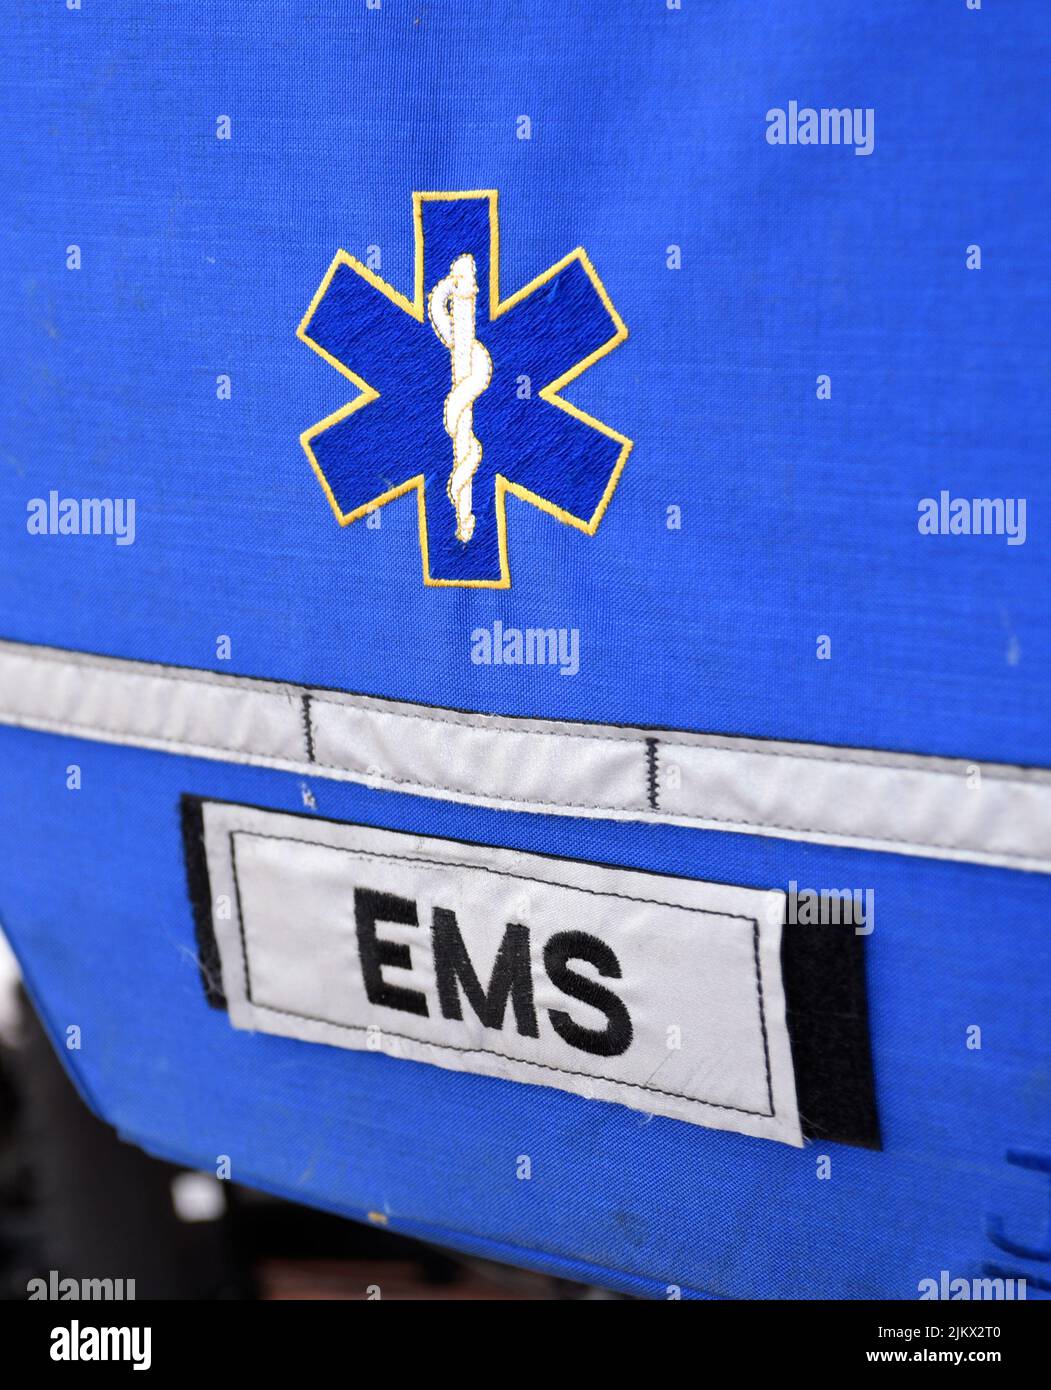 EMS bicycle response units equipped with Jandd Mounteering EMS panniers at an outdoor festival in Santa Fe, New Mexico. Stock Photo